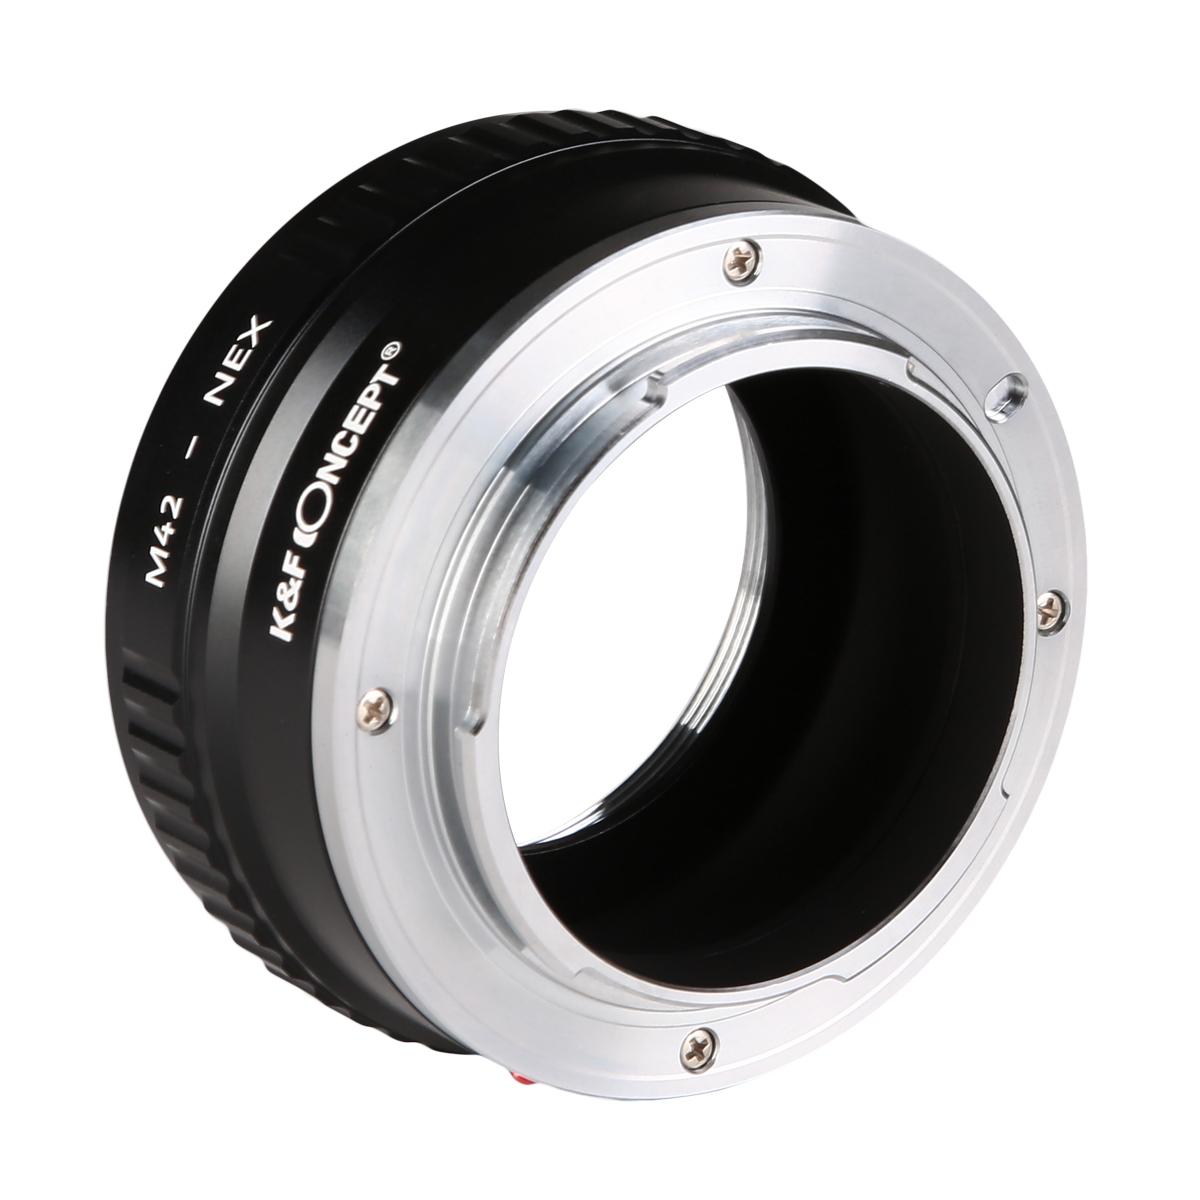 M42 Lenses to Sony E Mount Camera Copper Adapter